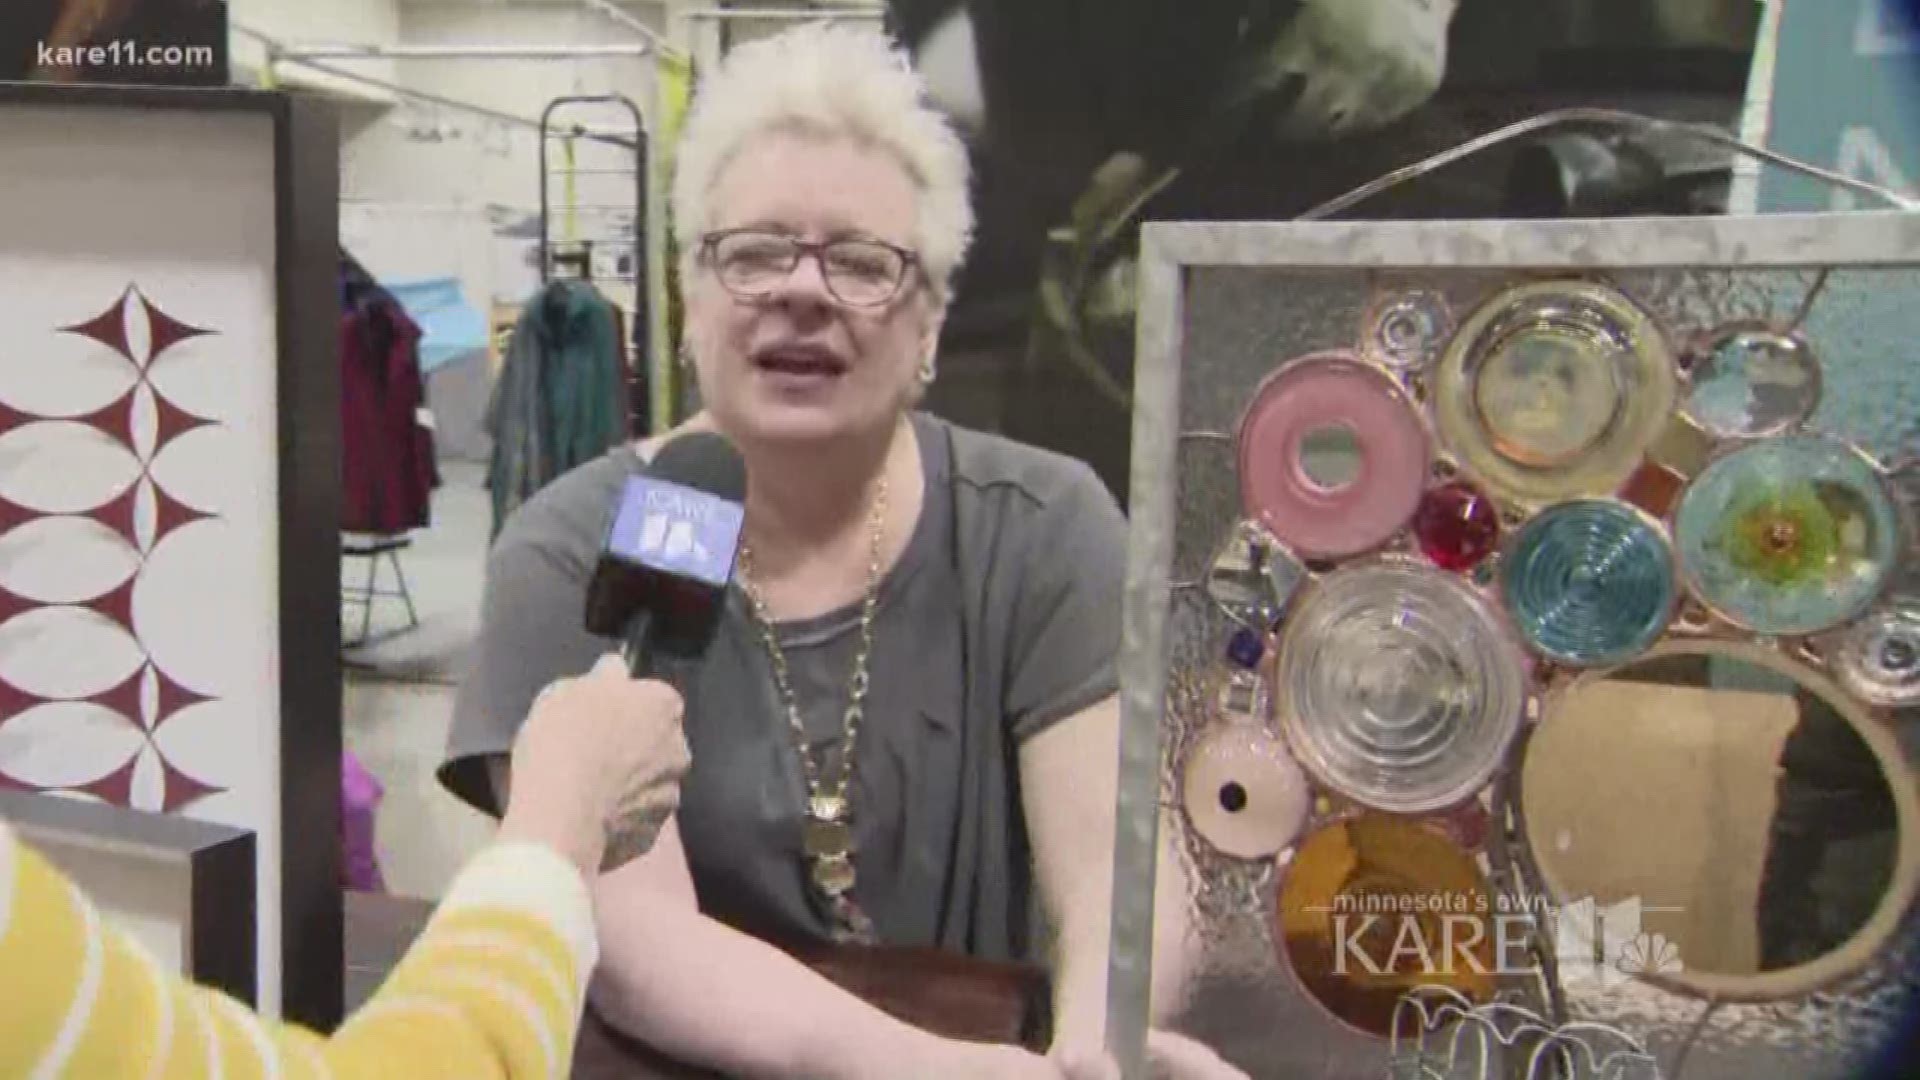 St. Paul River Center hosts the American Craft show this weekend.